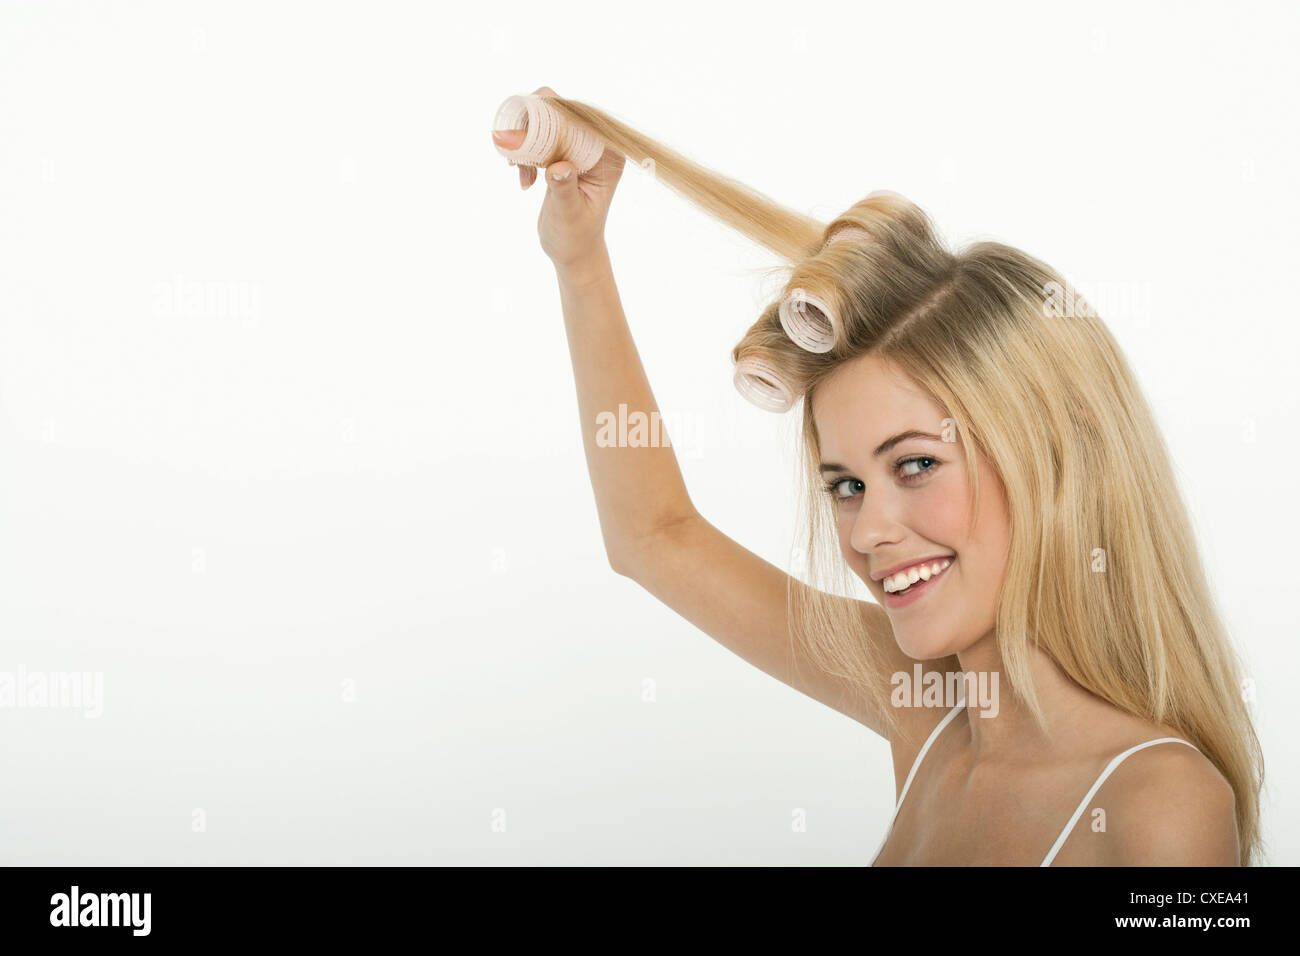 Teen girl rolling her hair with curlers Stock Photo